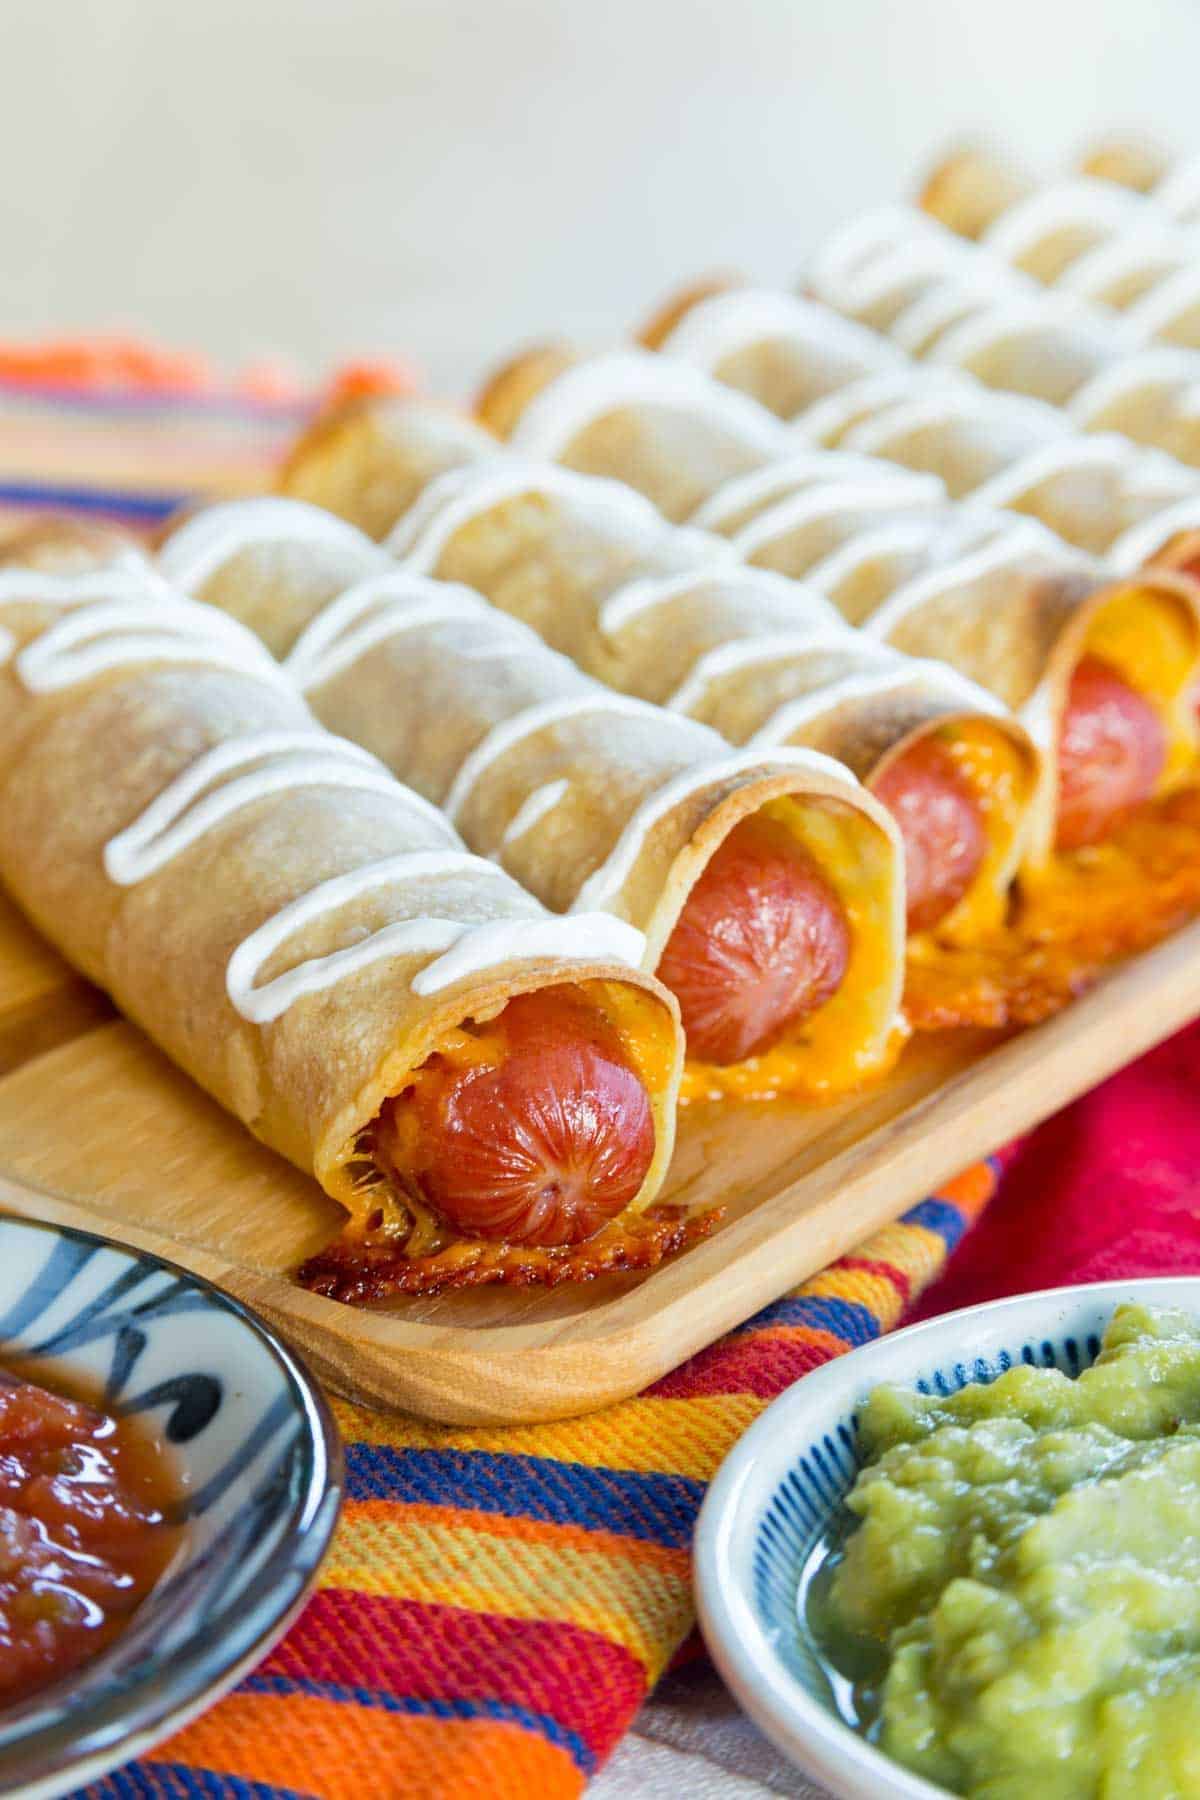 Crispy cheesy mexican hot dog taquitos on a wooden tray.